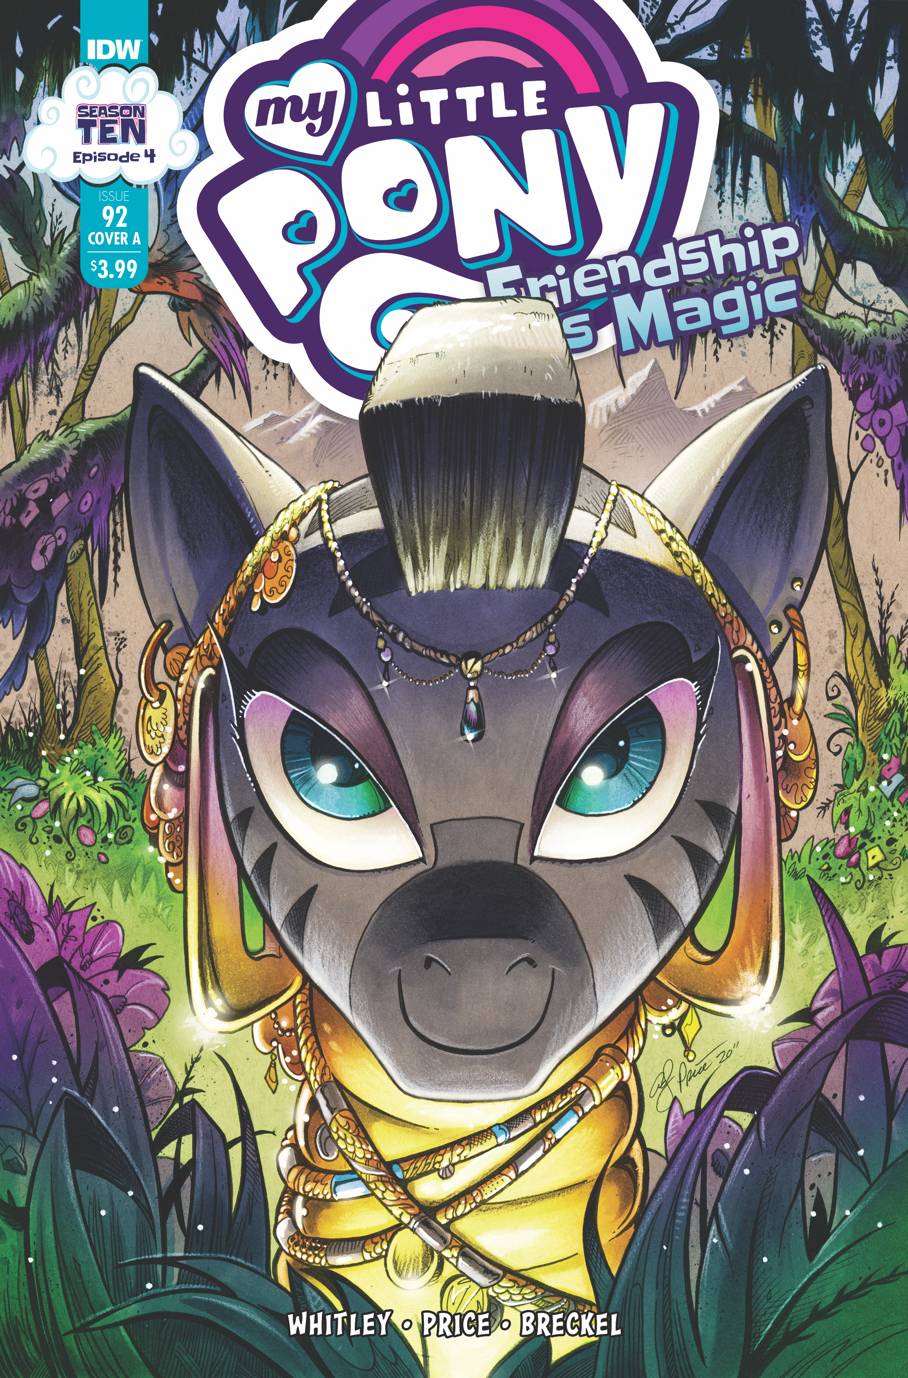 My Little Pony Friendship Is Magic #92 Cover A Price